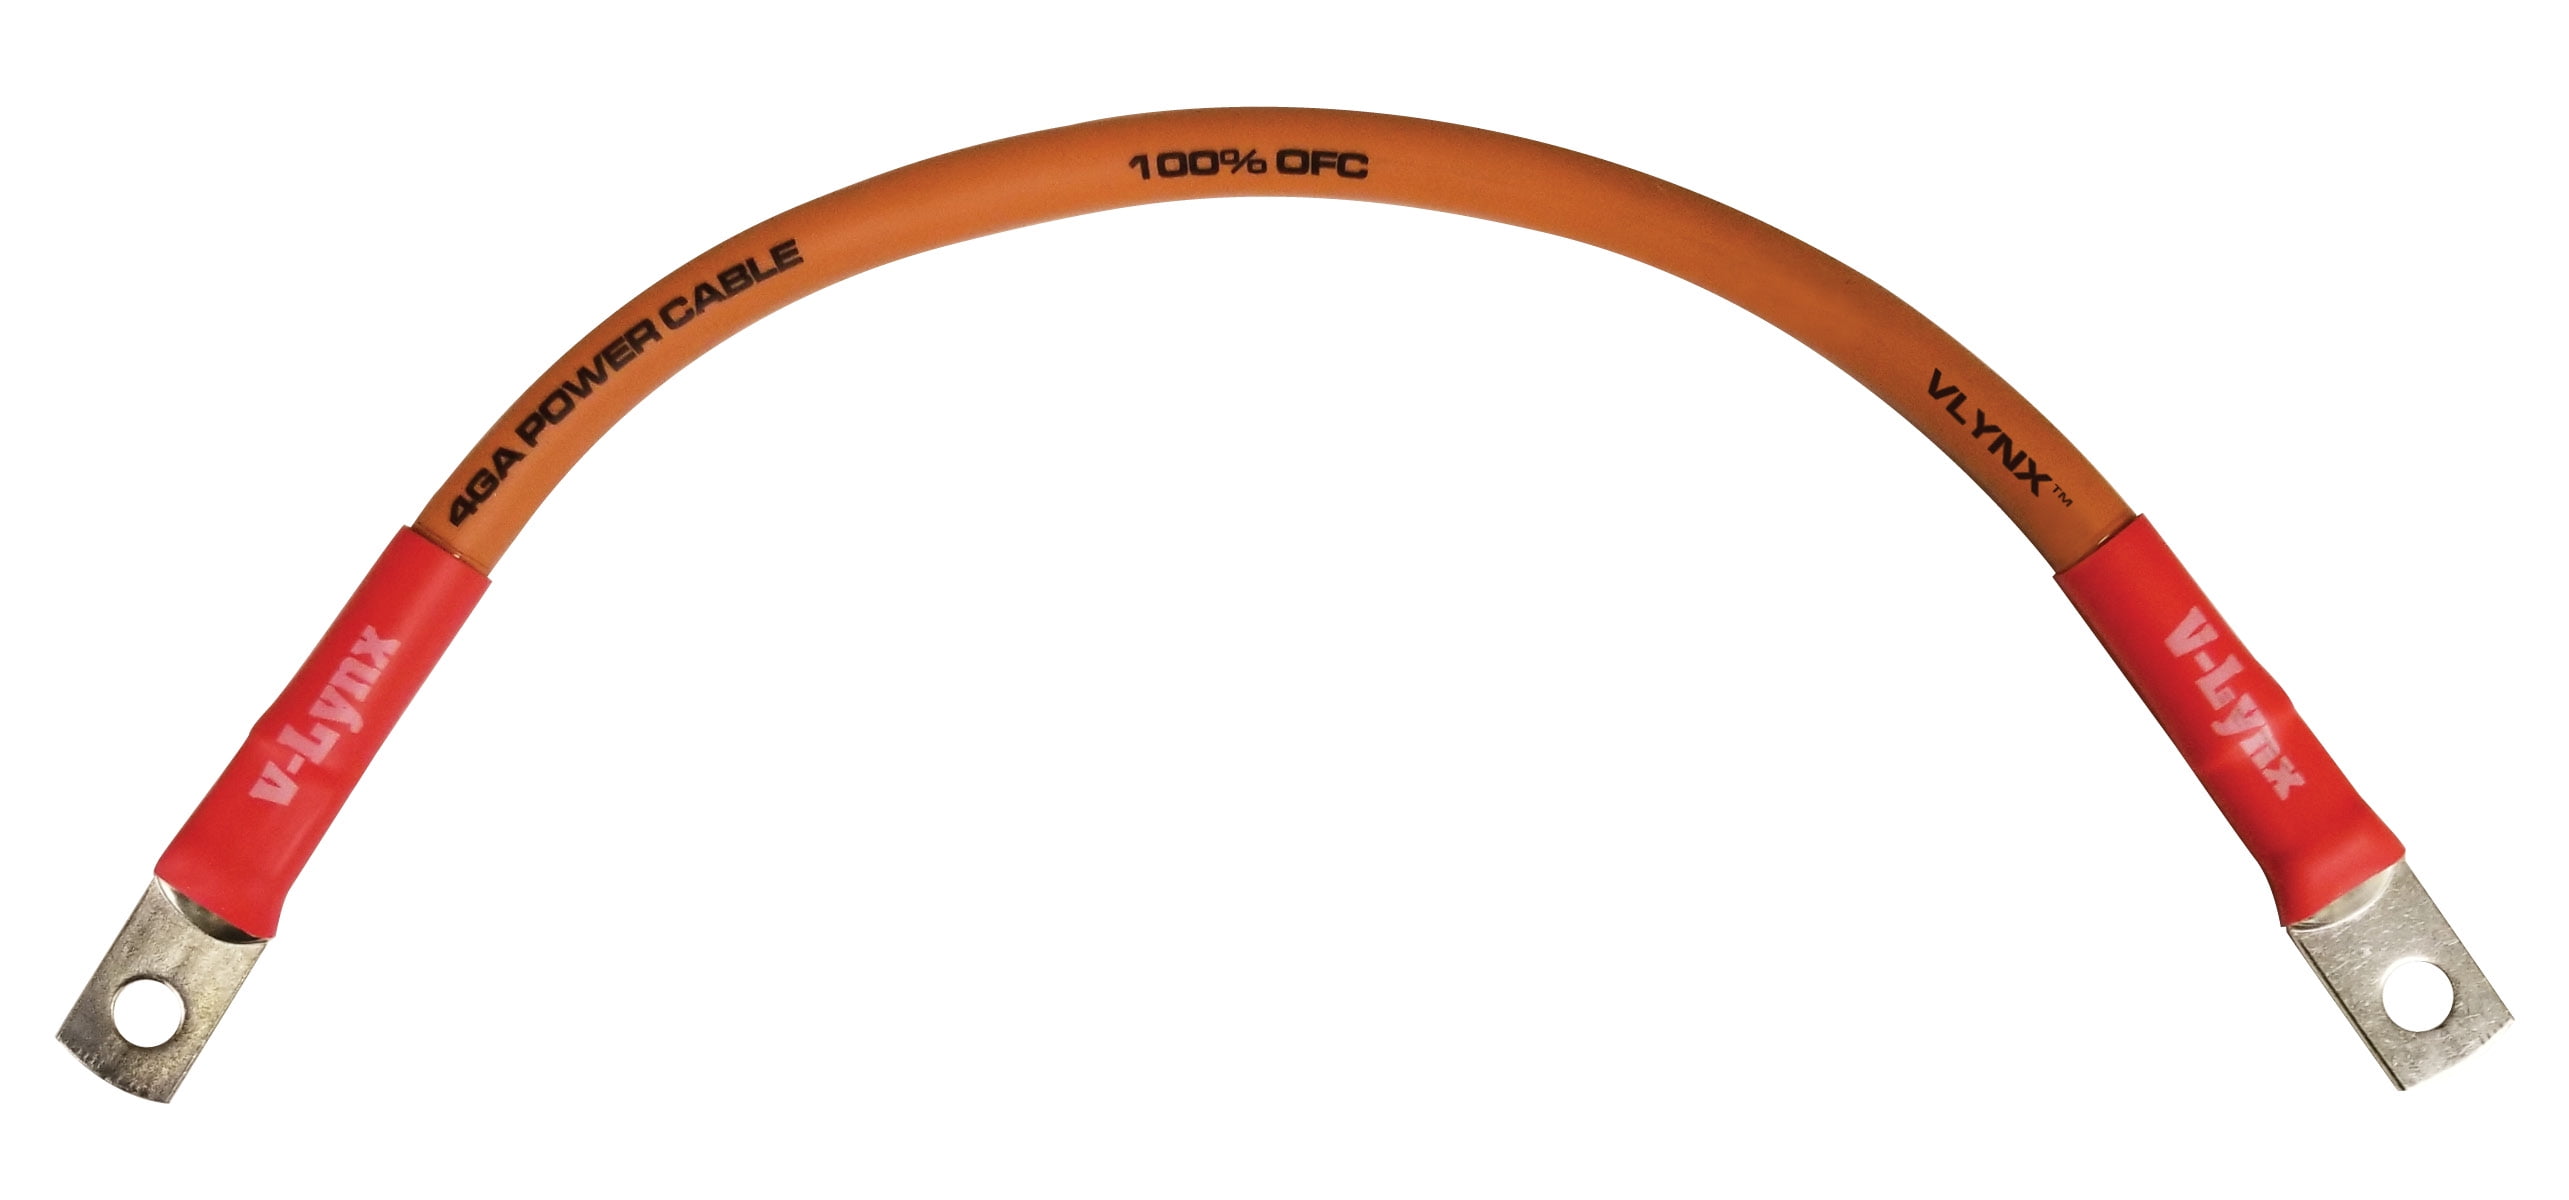 VBL4-O 4 Gauge AWG Battery Cable for Golf Carts 9" 100% OFC Copper 2 Or 4 Gauge Wire For Golf Cart